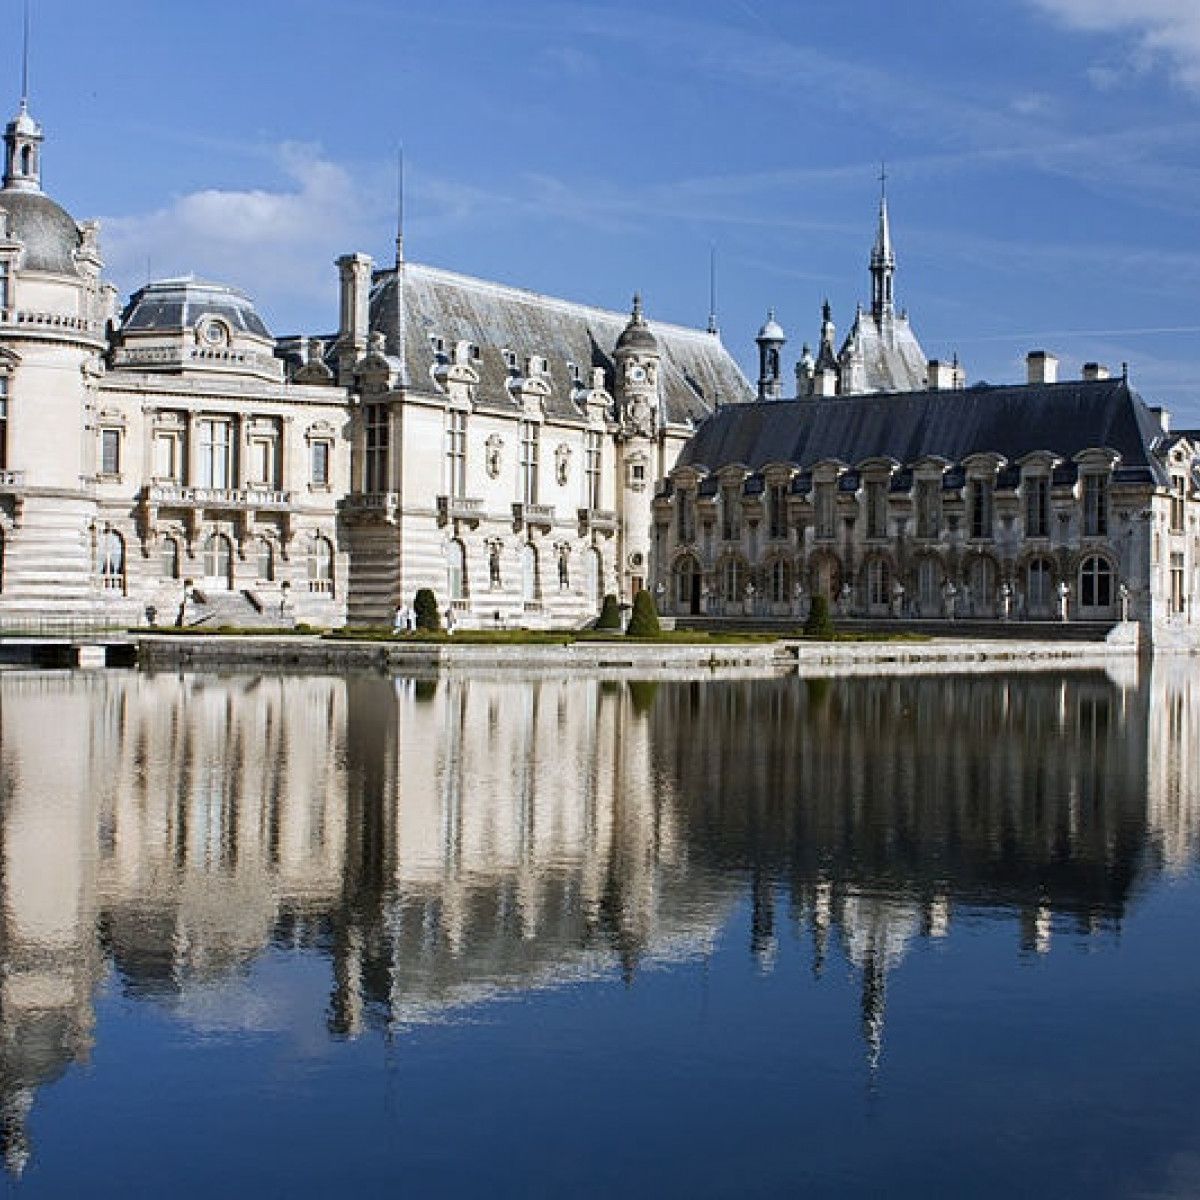 Chantilly- a must visit destination for all horse lovers!